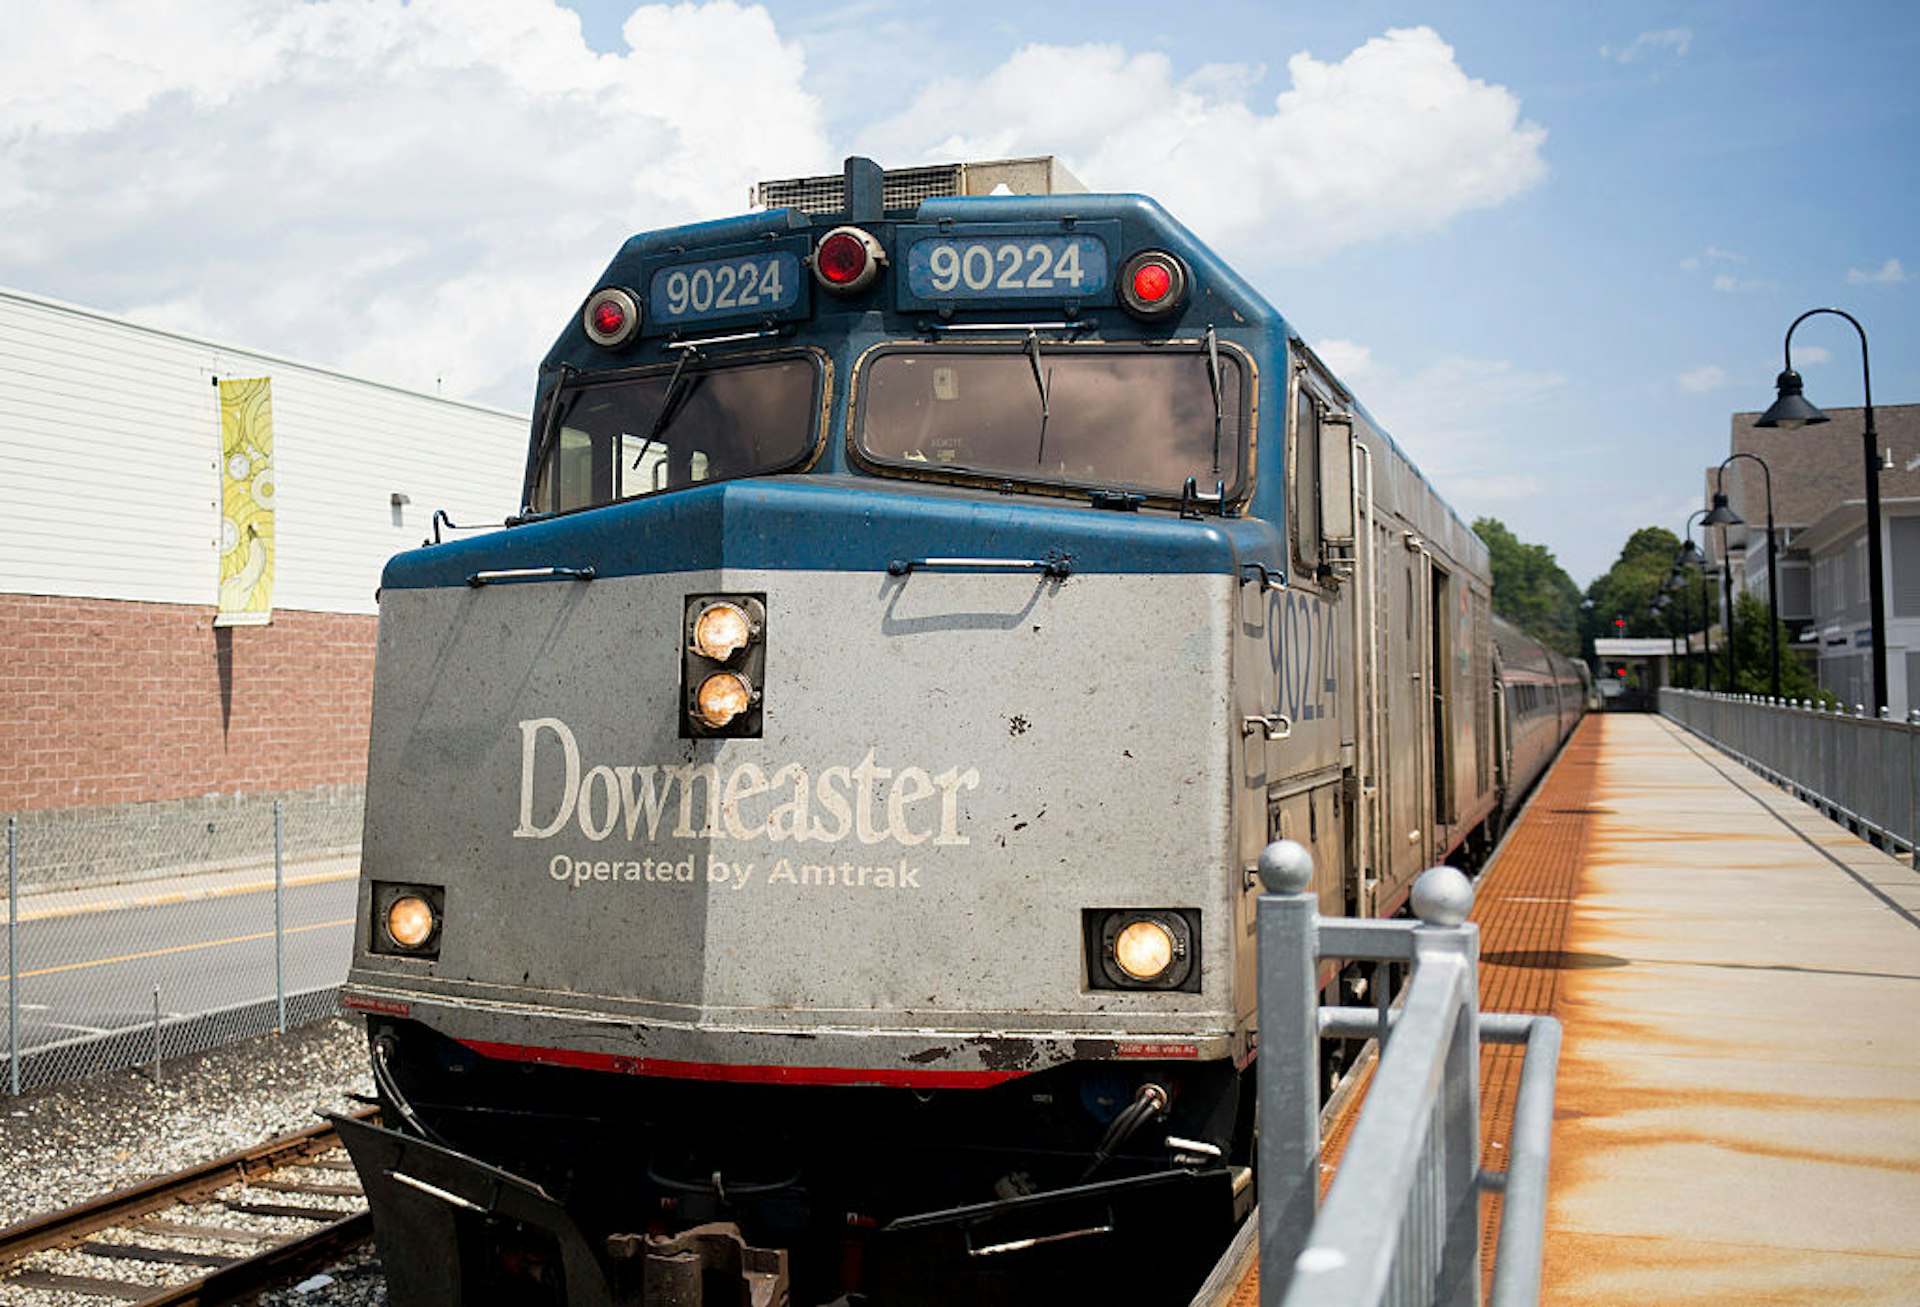 The northbound Amtrak Downeaster at the train station in Brunswick as seen from the front